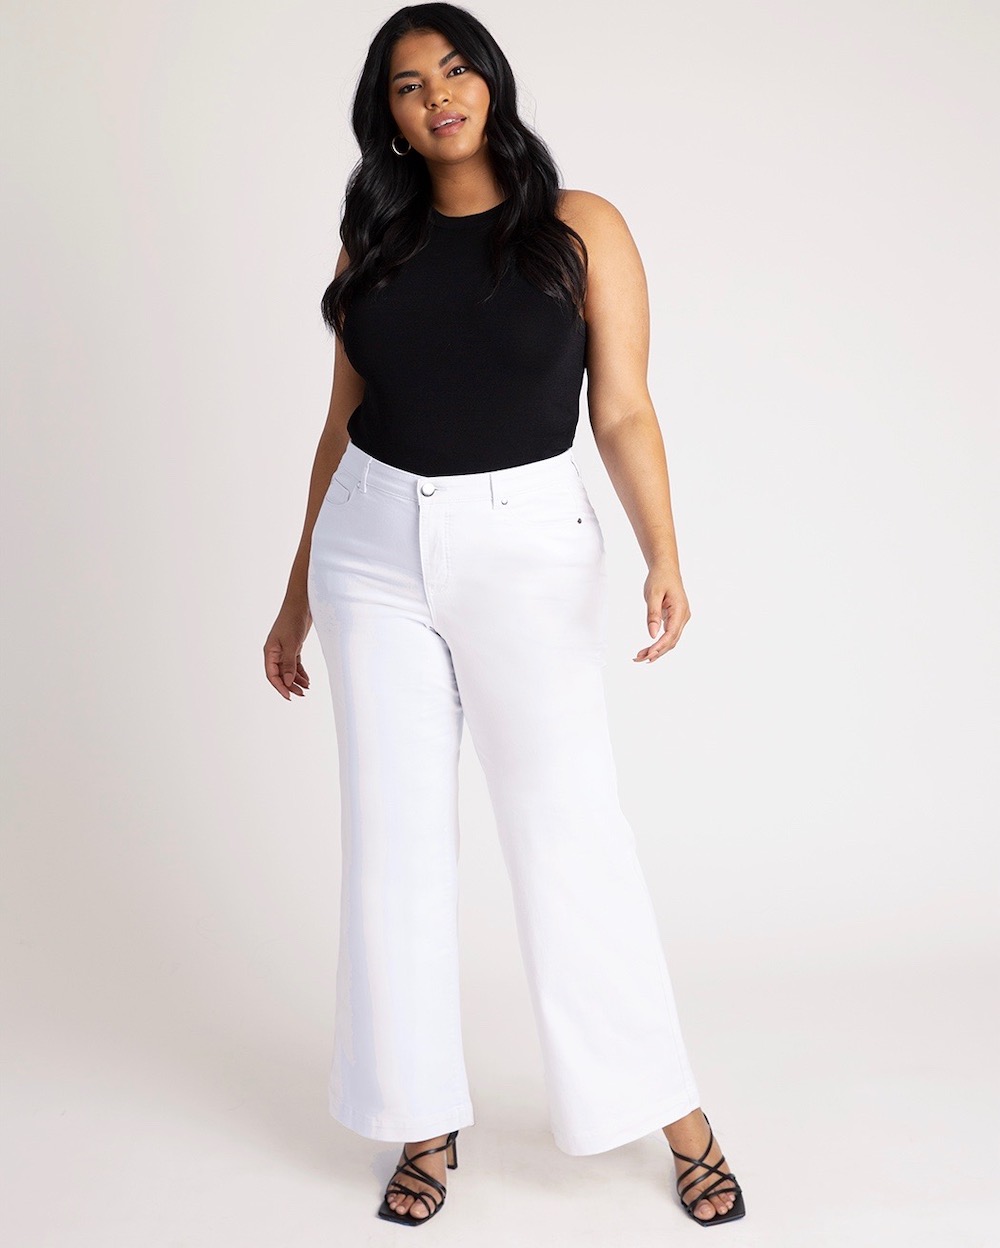 White Jeans to Show Off All Your Summer Tops - theFashionSpot